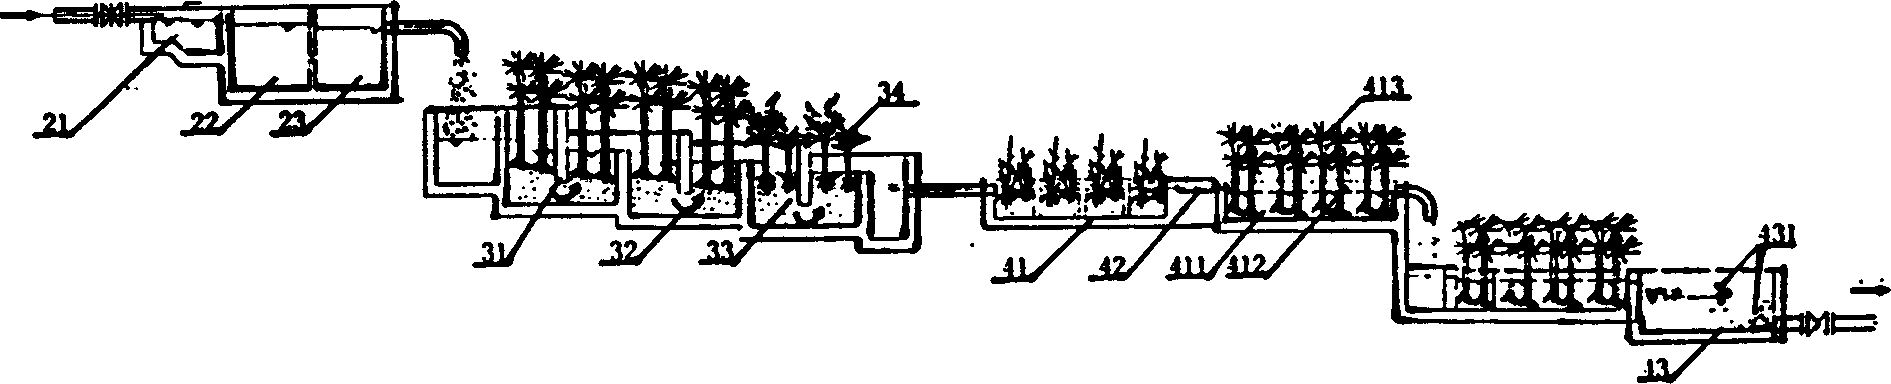 System and process for sawage treating with baffling wet land filtering tank and rateral underflow wet land bed